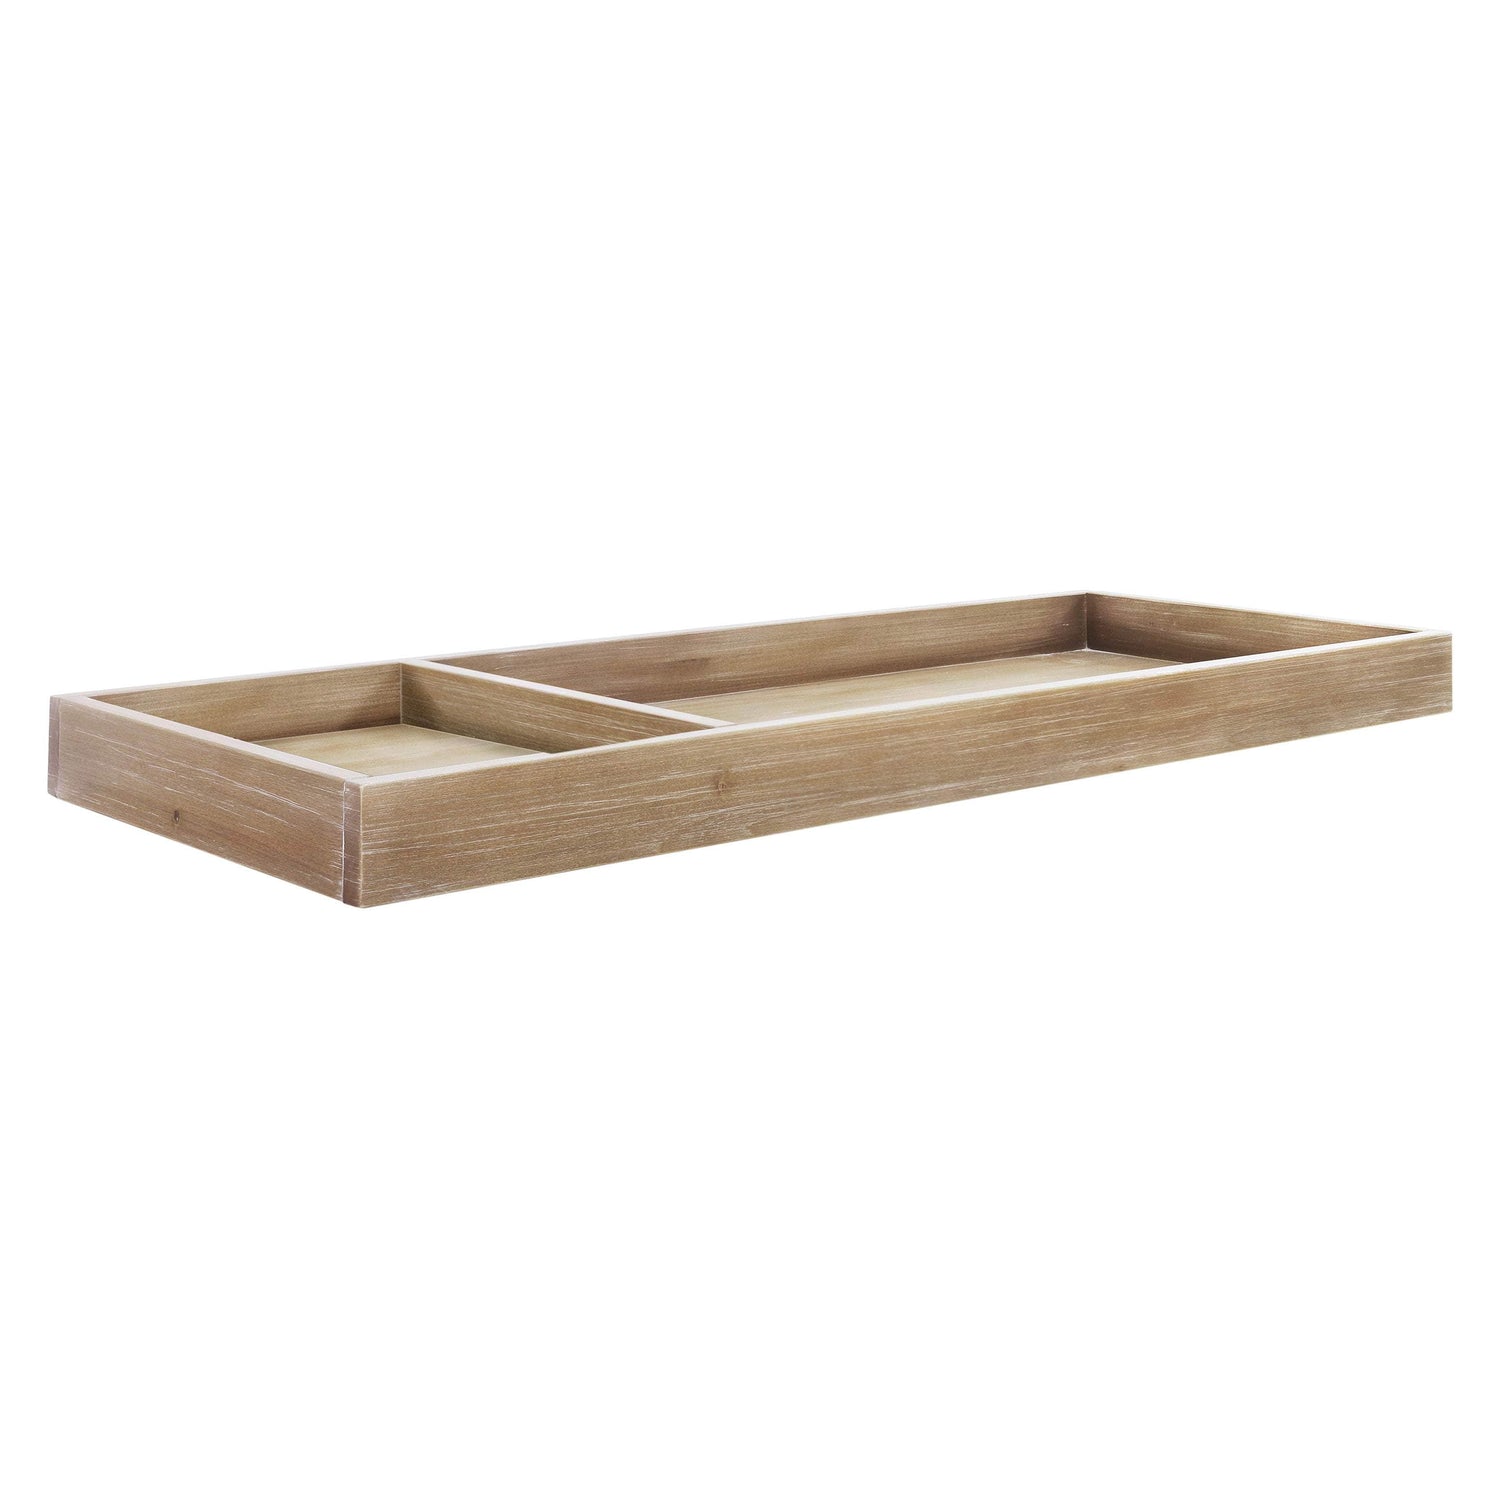 M0619DF,Universal Wide Removable Changing Tray in Driftwood